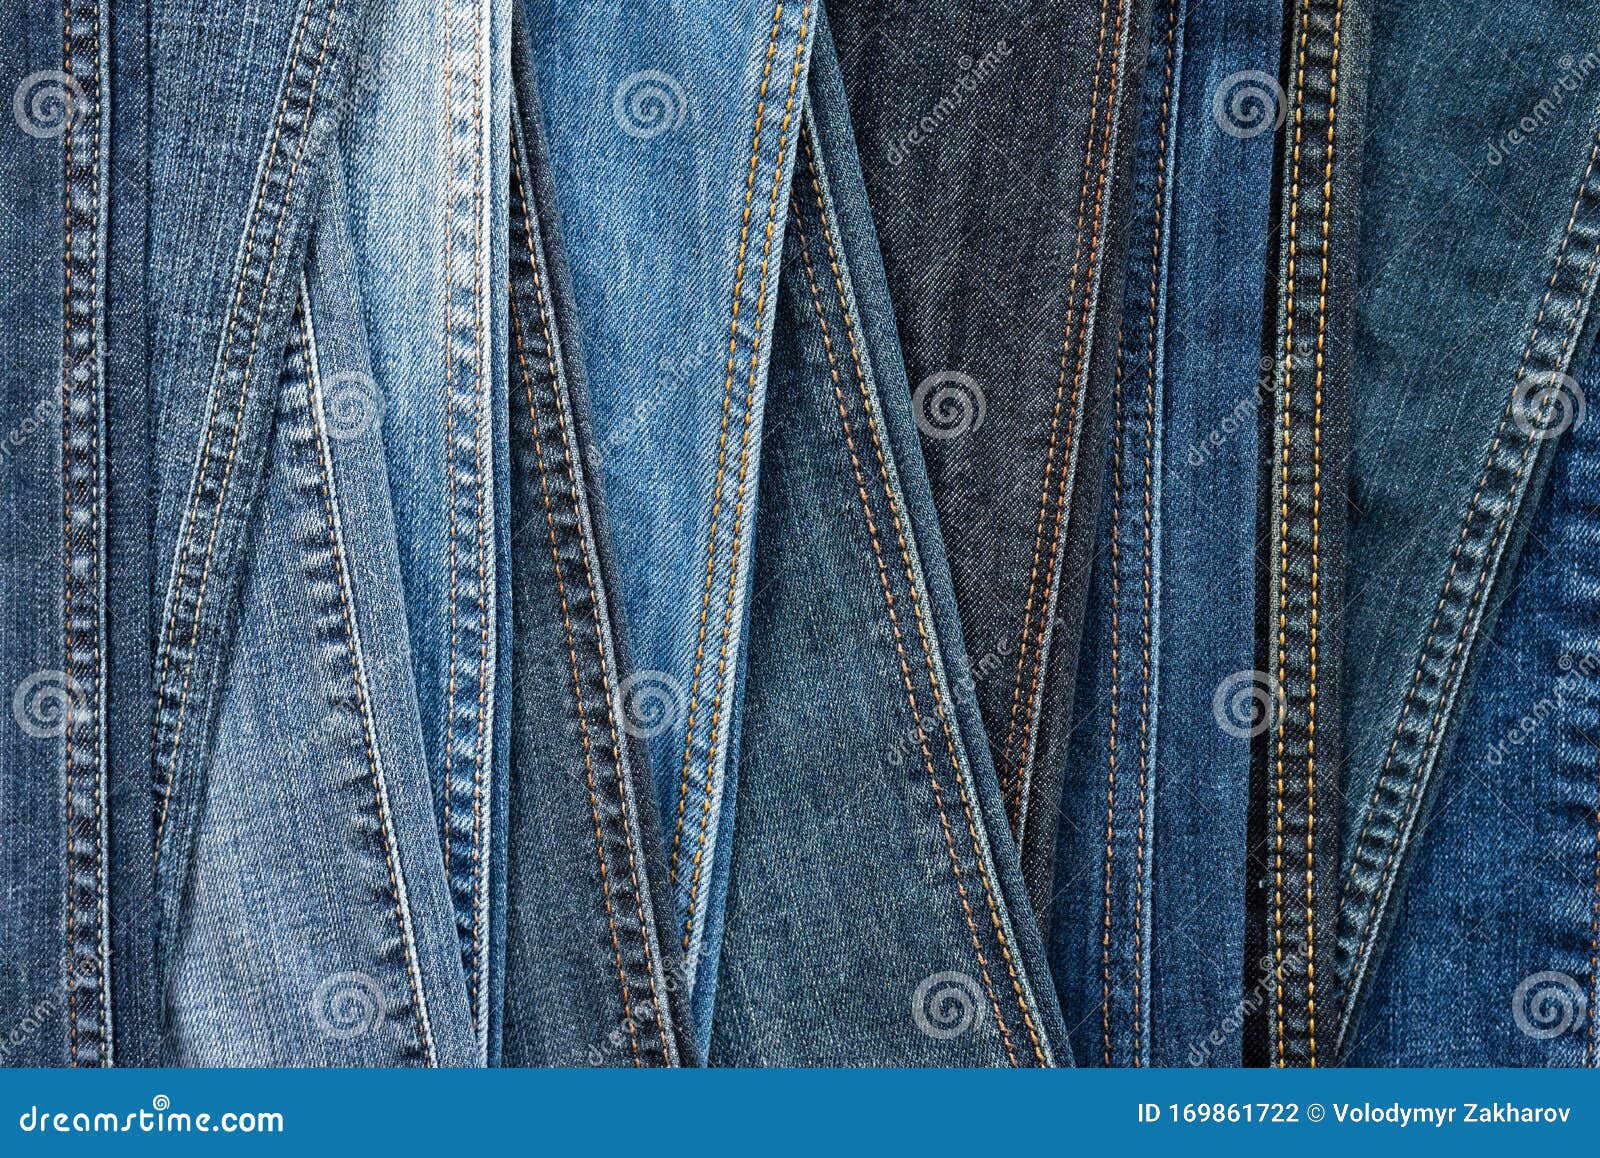 Different shades of blue jeans denim fabrics. Y